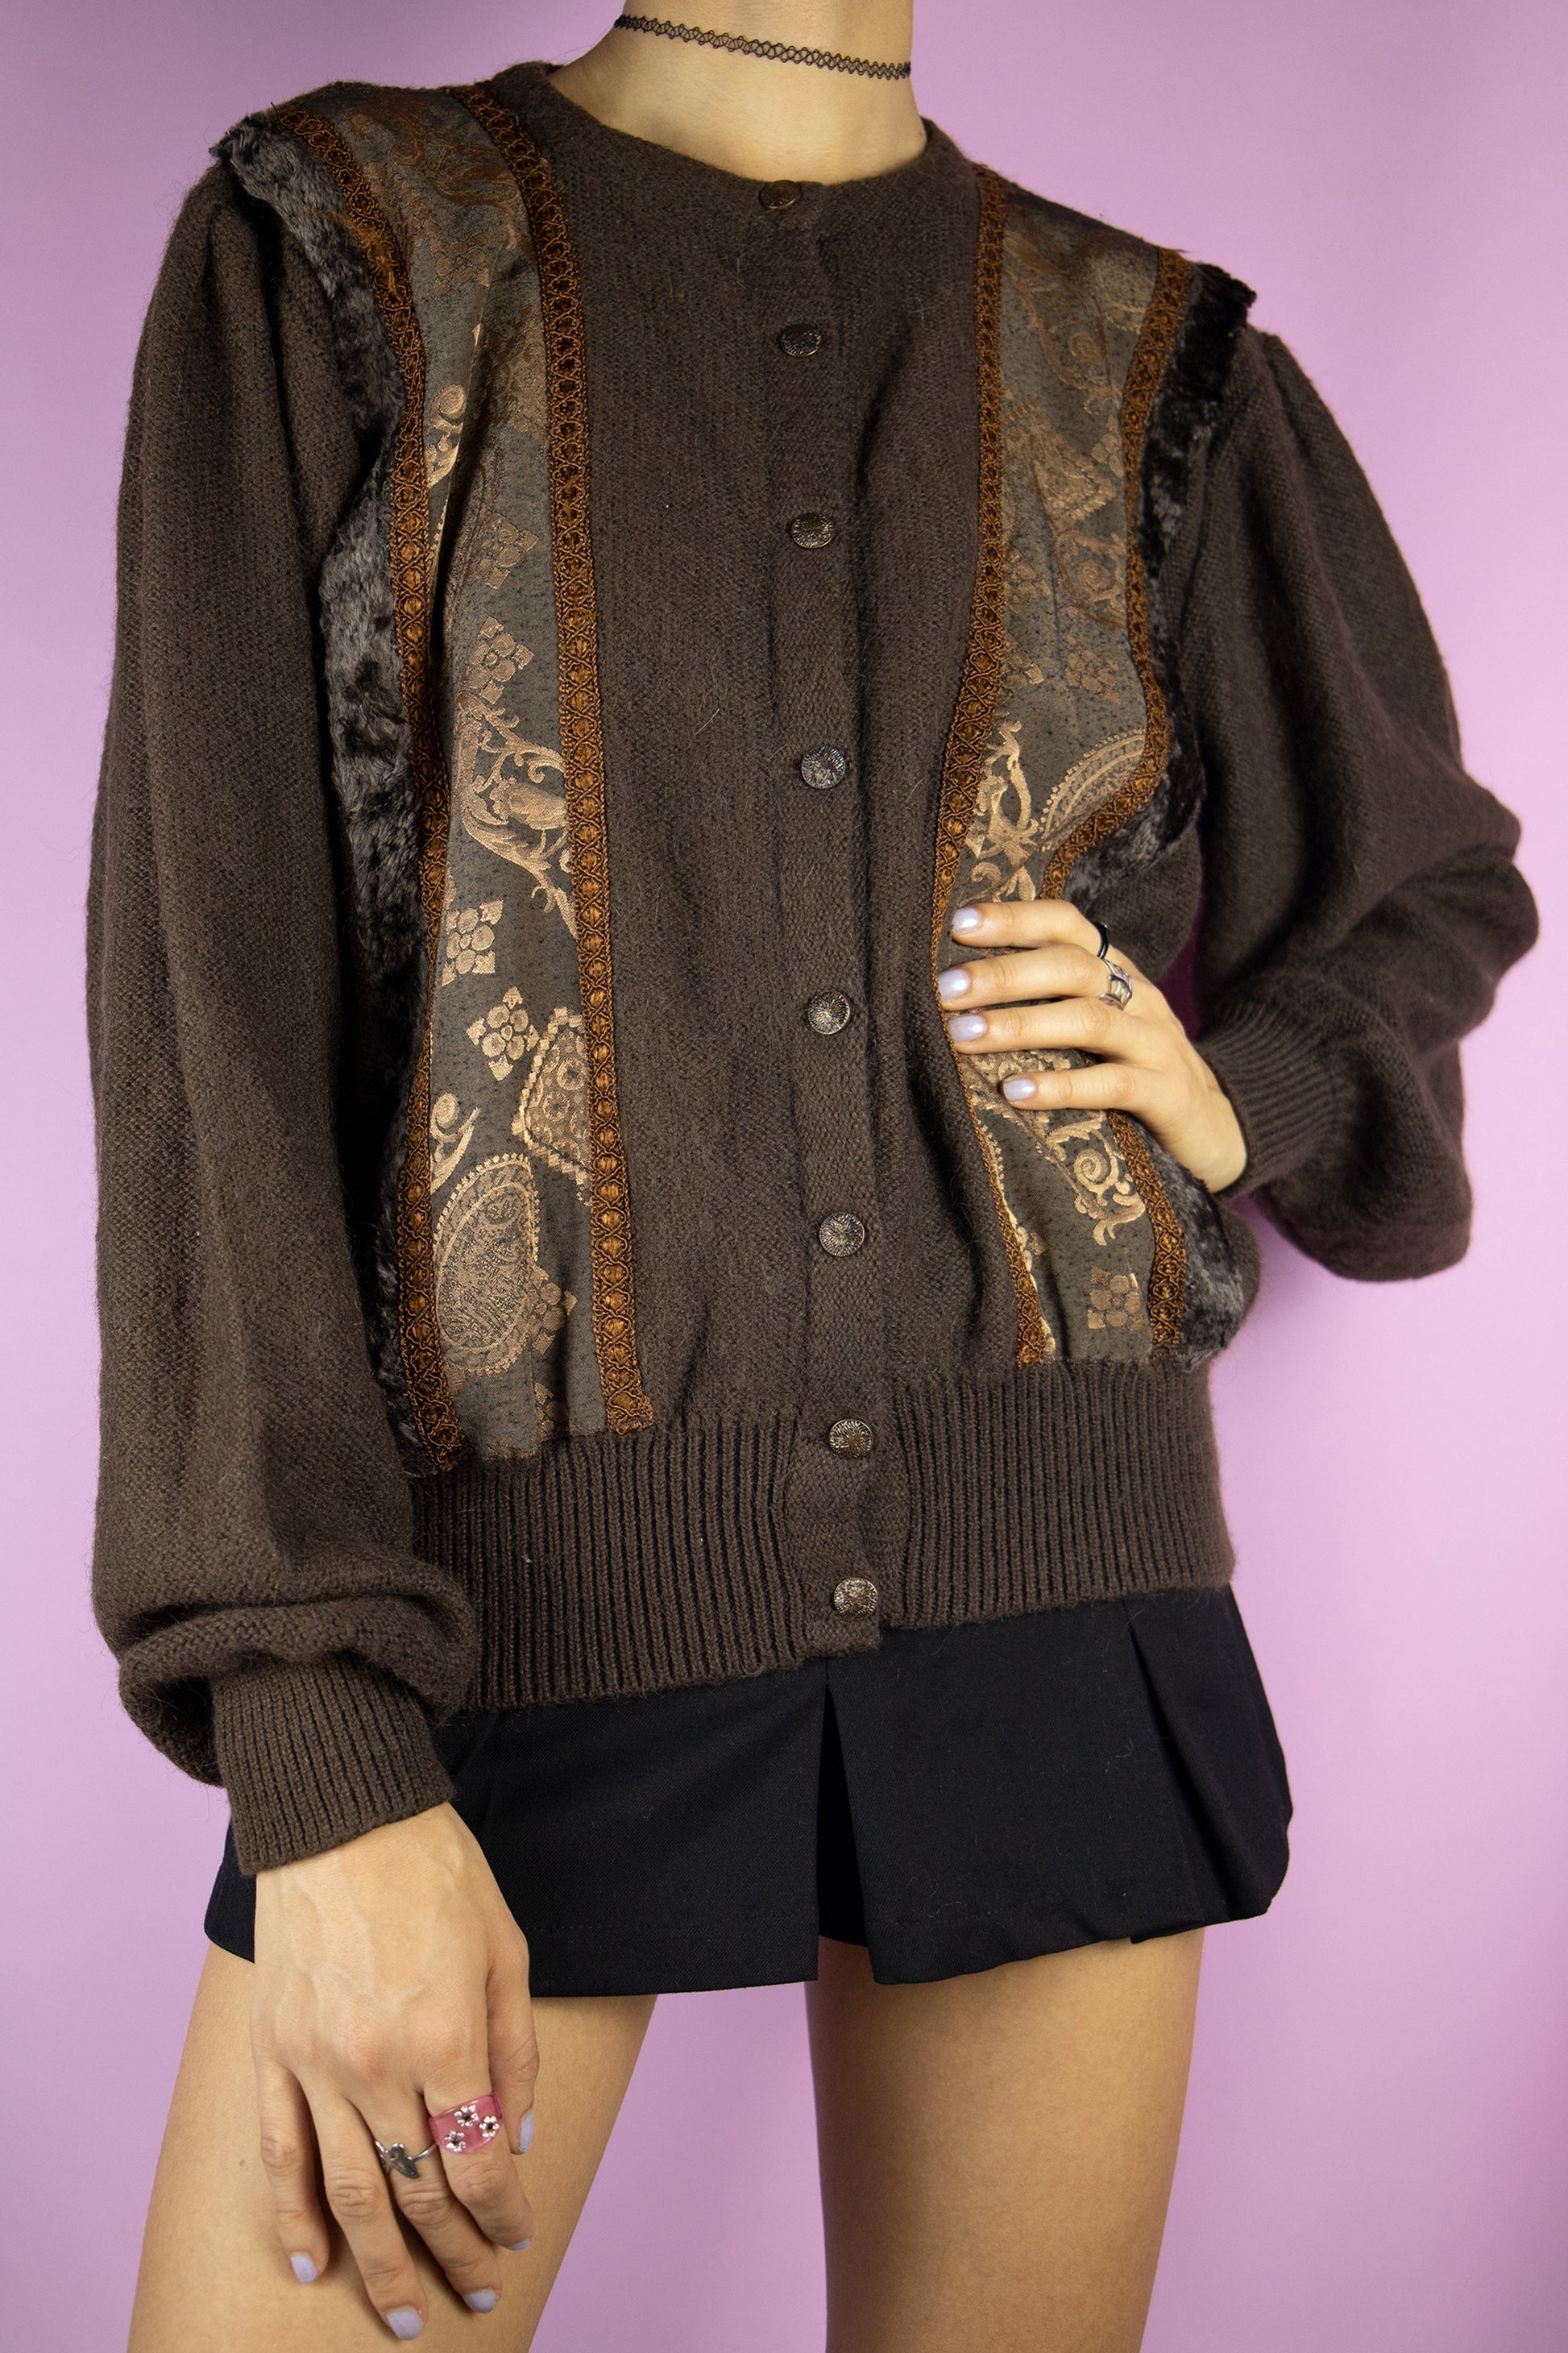 The Vintage 90s Brown Puff Sleeve Cardigan is a dark brown mohair blend cardigan with embroidered and faux fur details and puff sleeves. Boho fairy grunge 1990s knitted sweater.